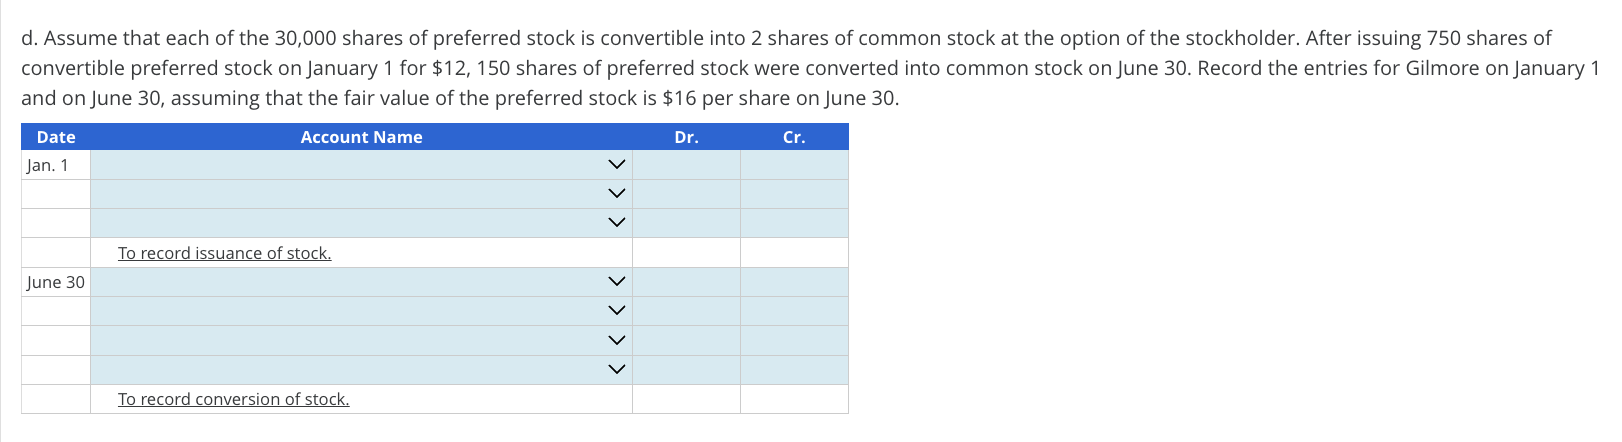 d. Assume that each of the 30,000 shares of preferred stock is convertible into 2 shares of common stock at